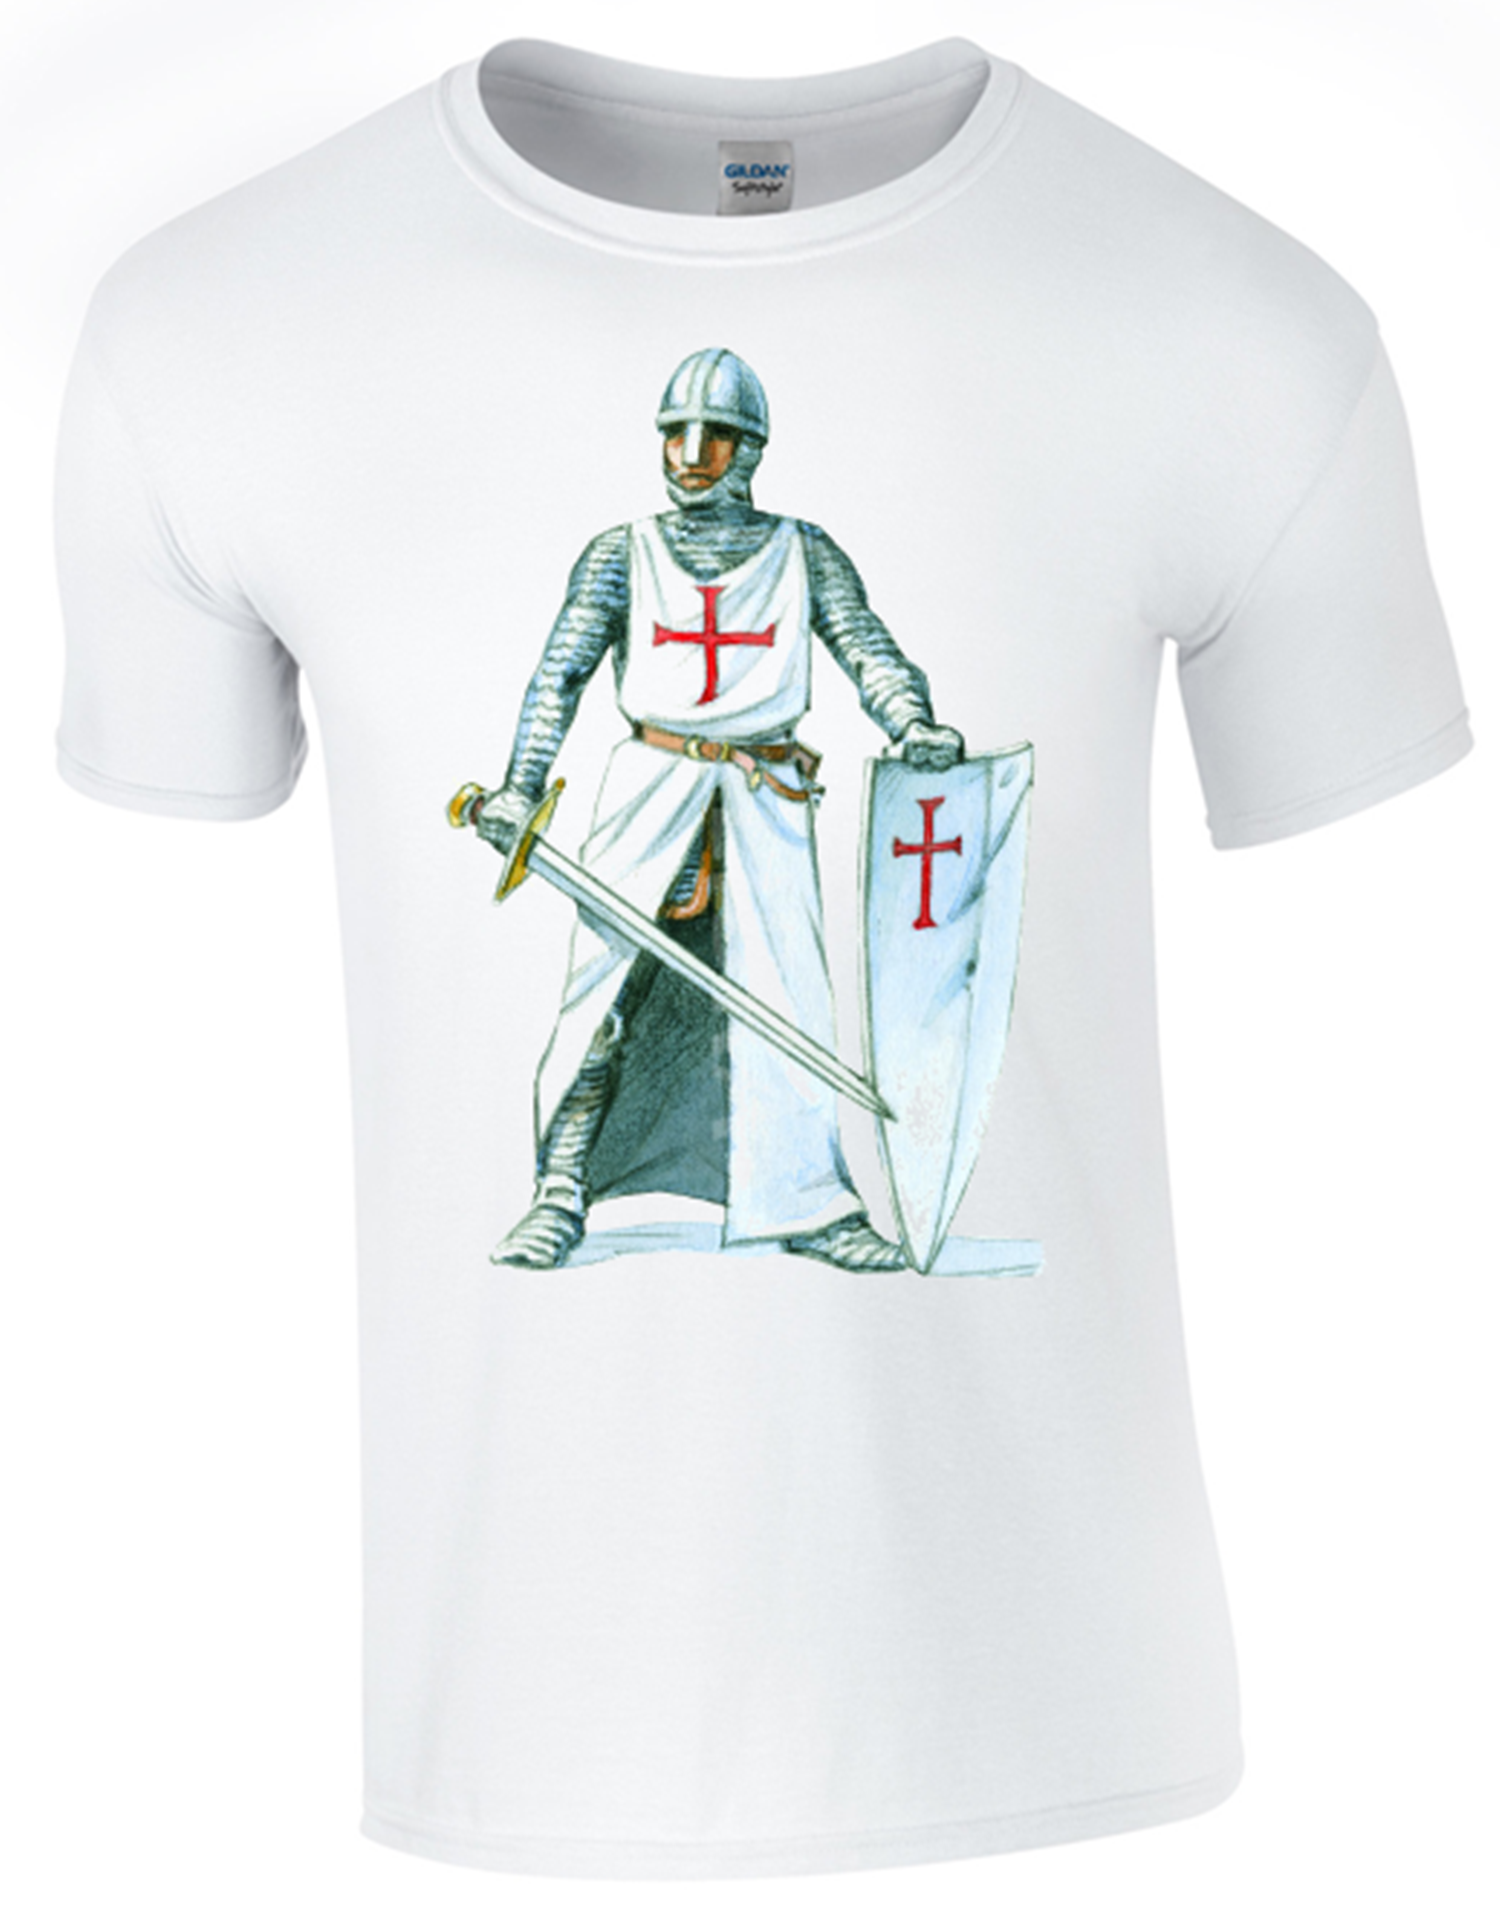 St George's Day Crusader T-Shirt Printed DTG (Direct to Garment) for a Permanent Finish. - Army 1157 kit S Army 1157 Kit Veterans Owned Business